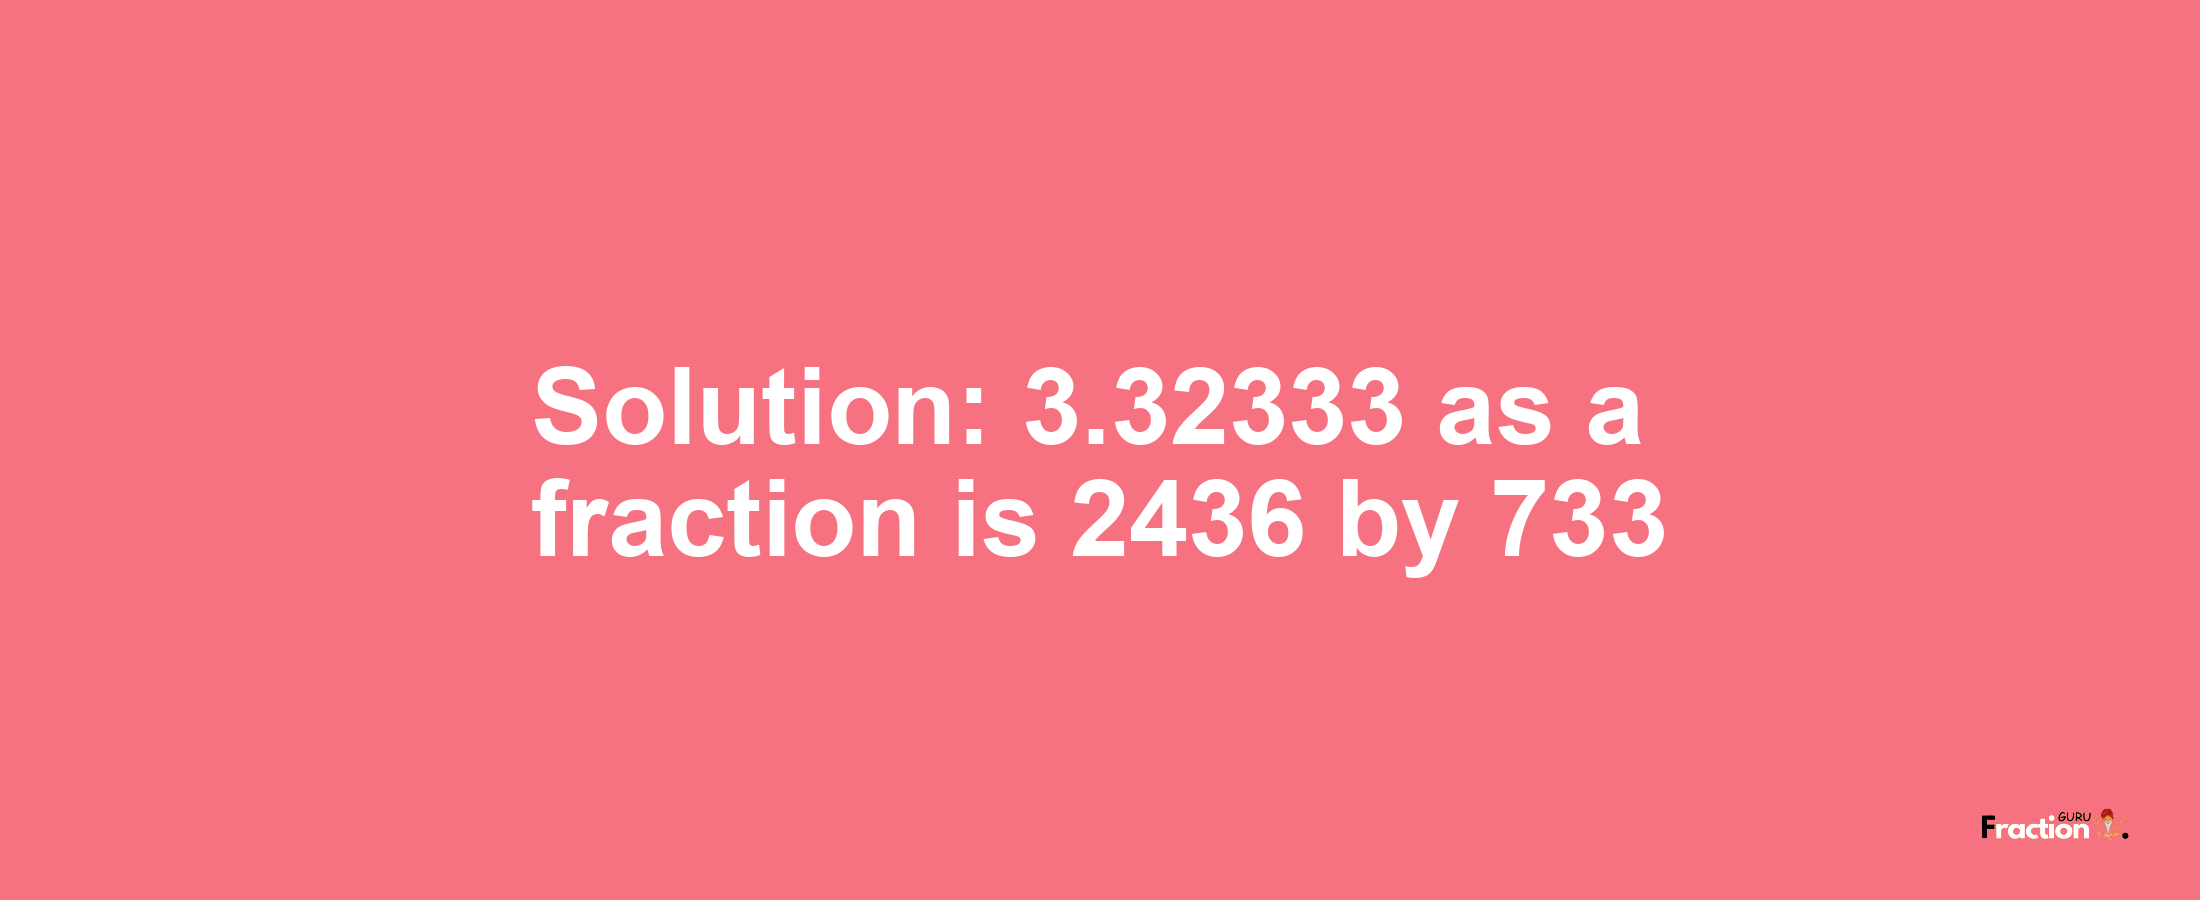 Solution:3.32333 as a fraction is 2436/733